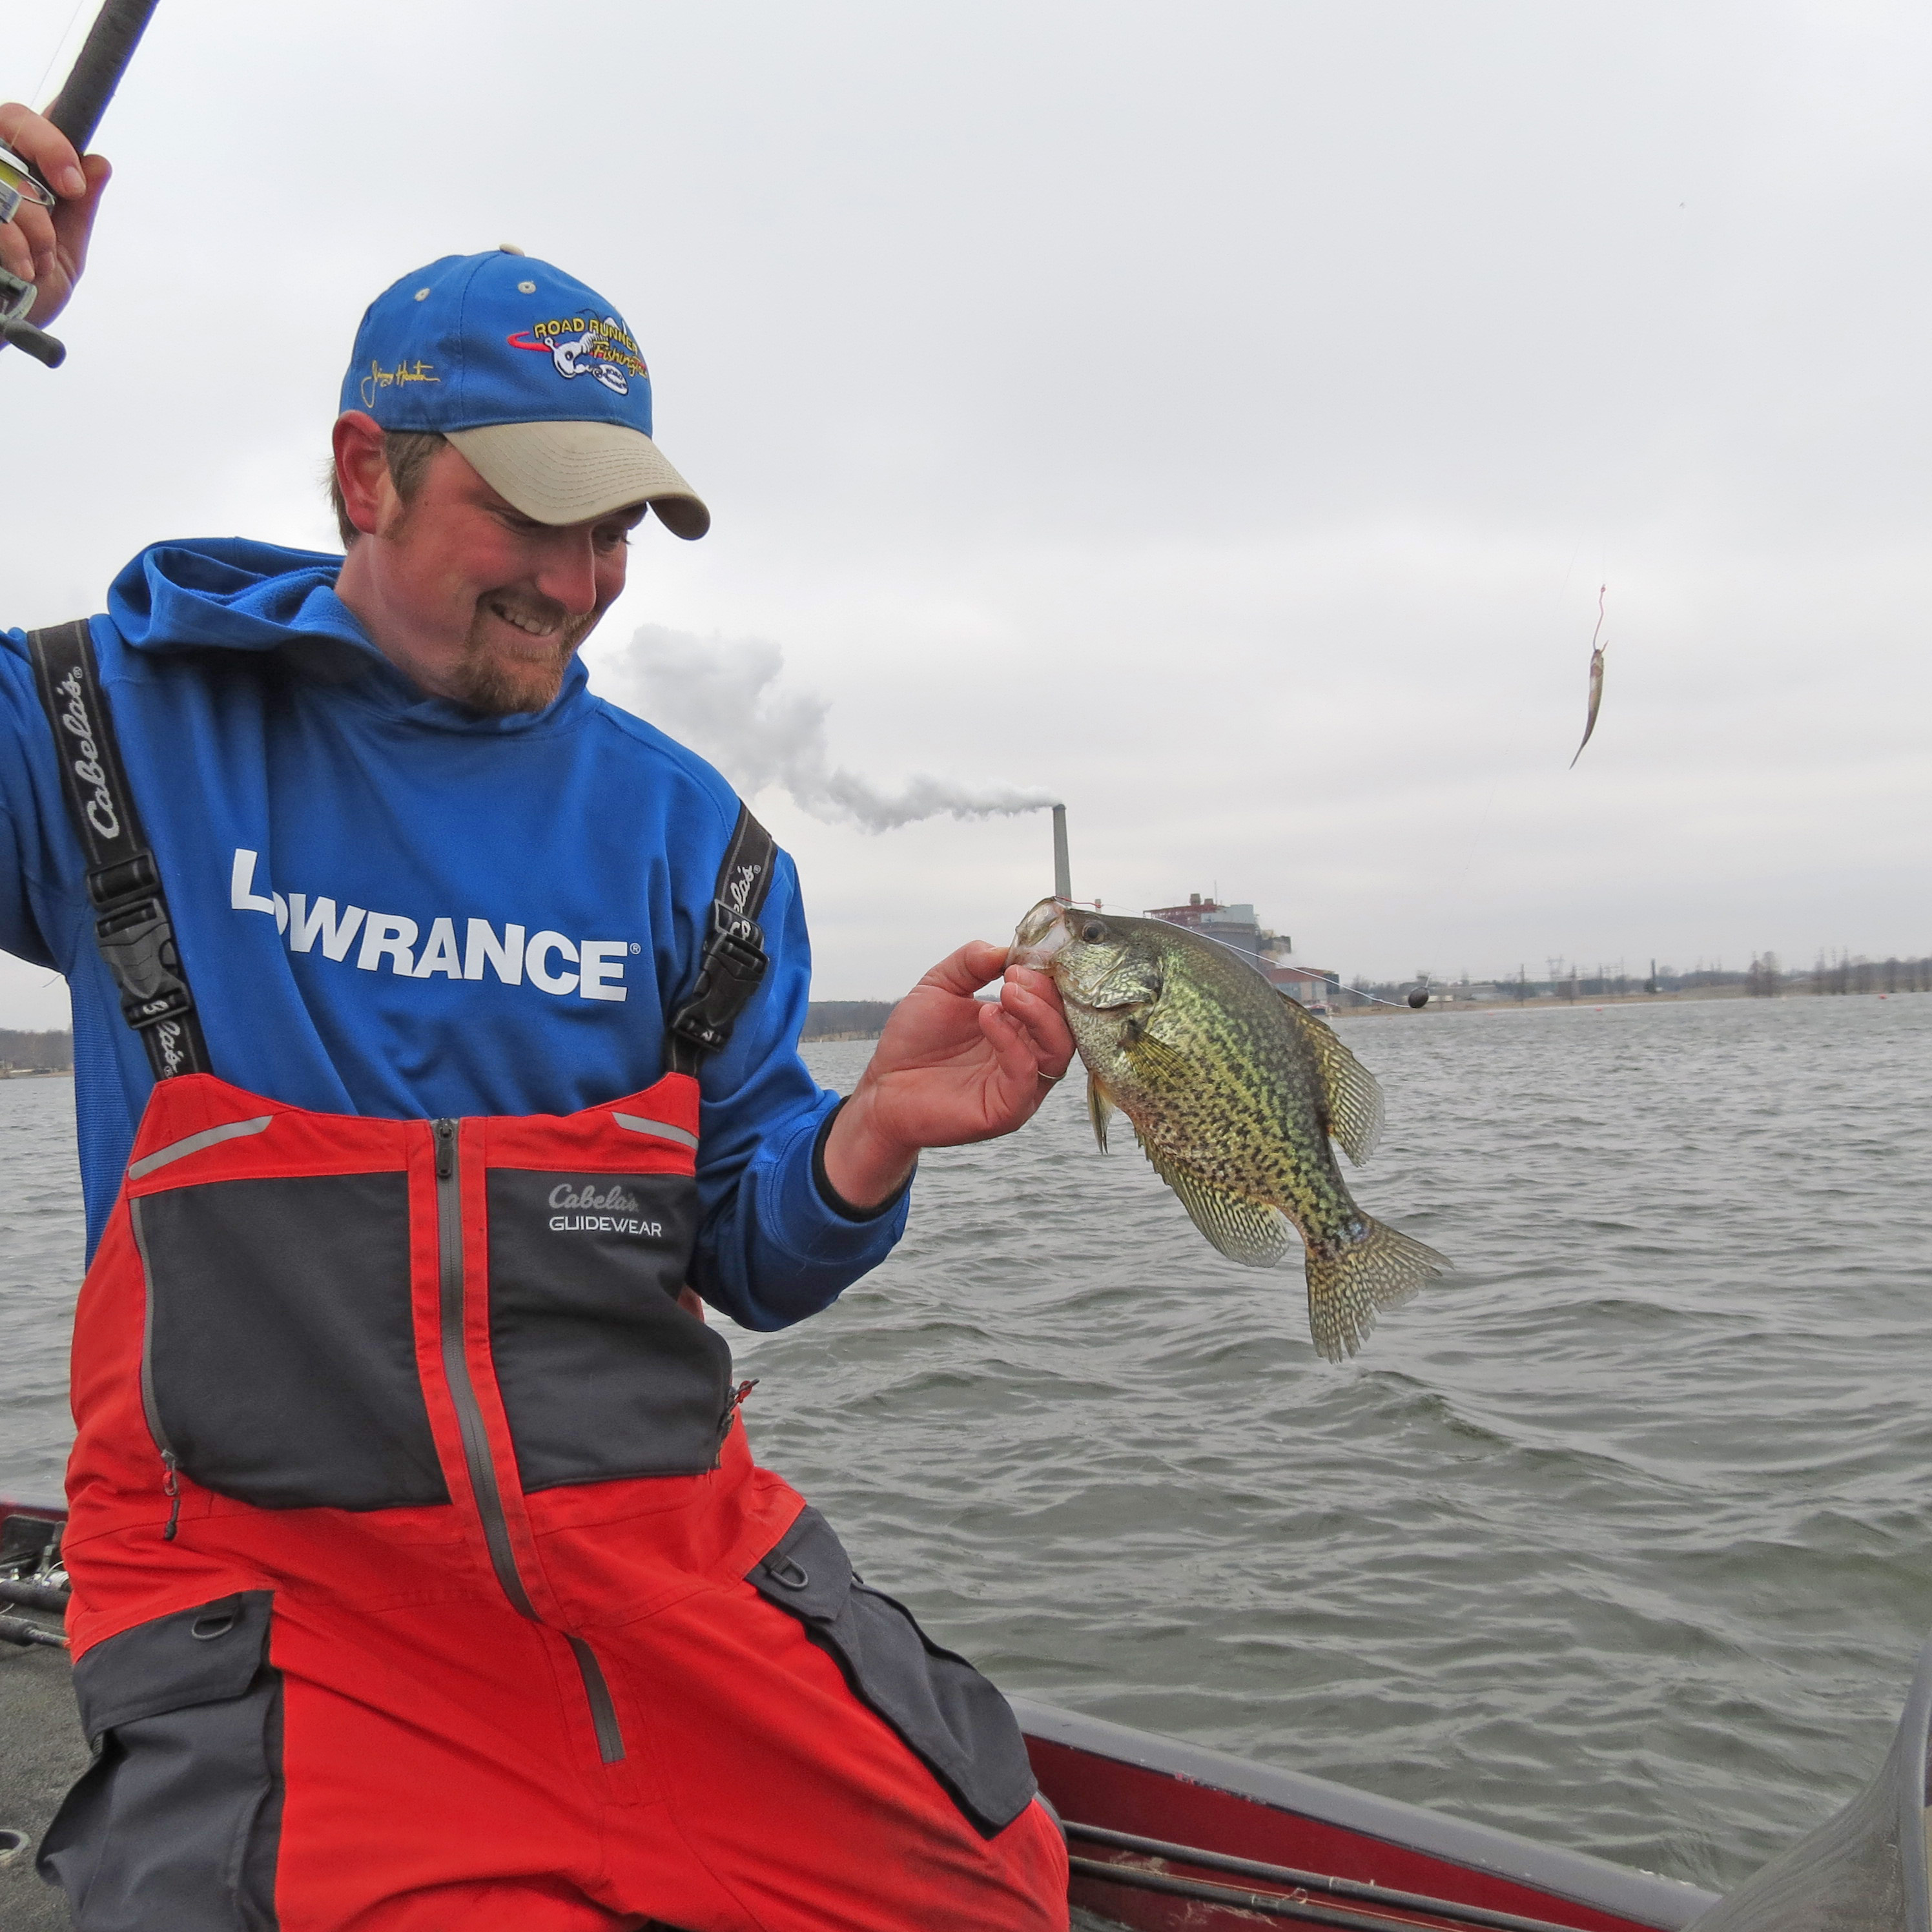 What types of events does the FLW Outdoors present?